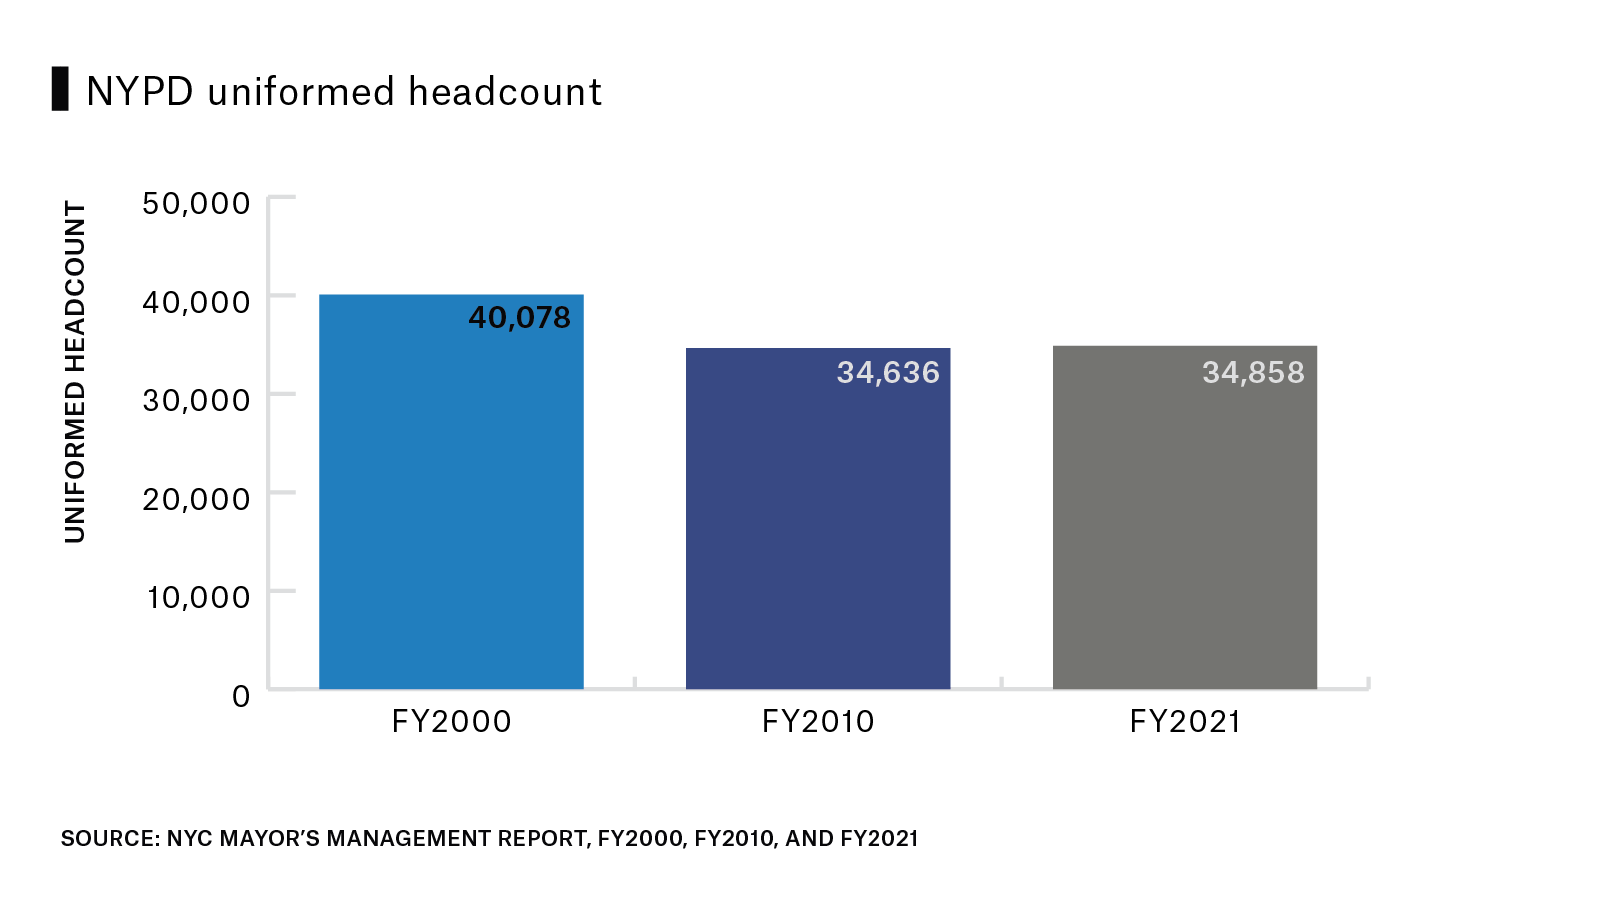 Bar chart provides the N, Y, P, D uniformed head count for Fiscal Years 2000, 2010, and 2021. The headcount decreased from 40,078 to 34,646 in 2010, and then remained relatively steady at 34,858 in 2021.